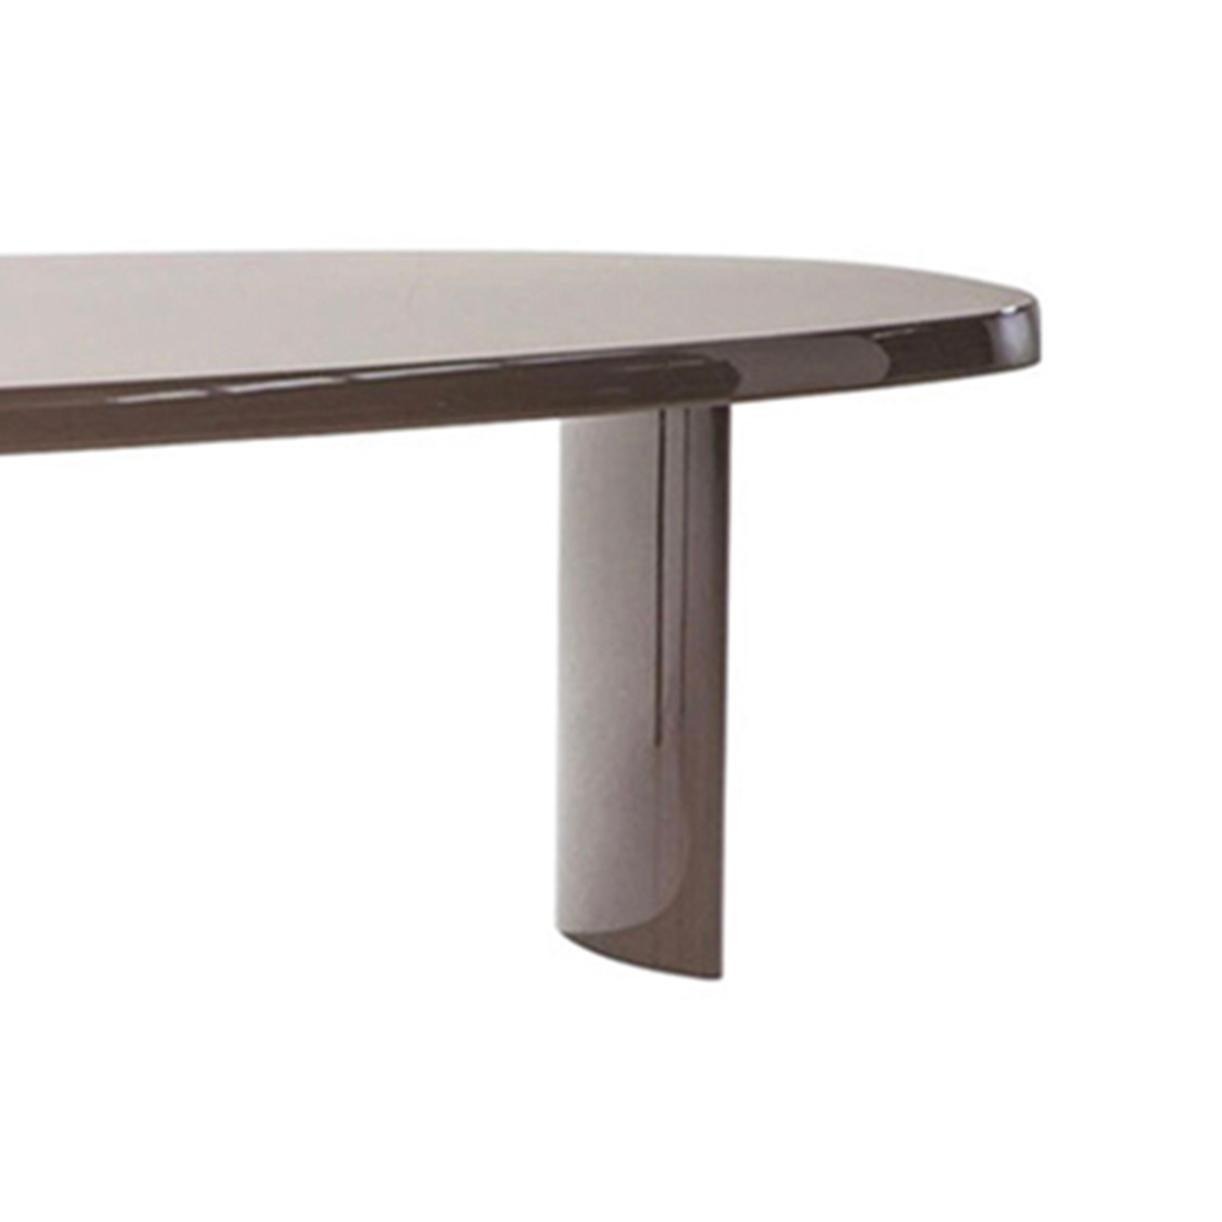 Italian Charlotte Perriand Table En Forme Libre, Glacé Brown Lacquered Wood by Cassina For Sale